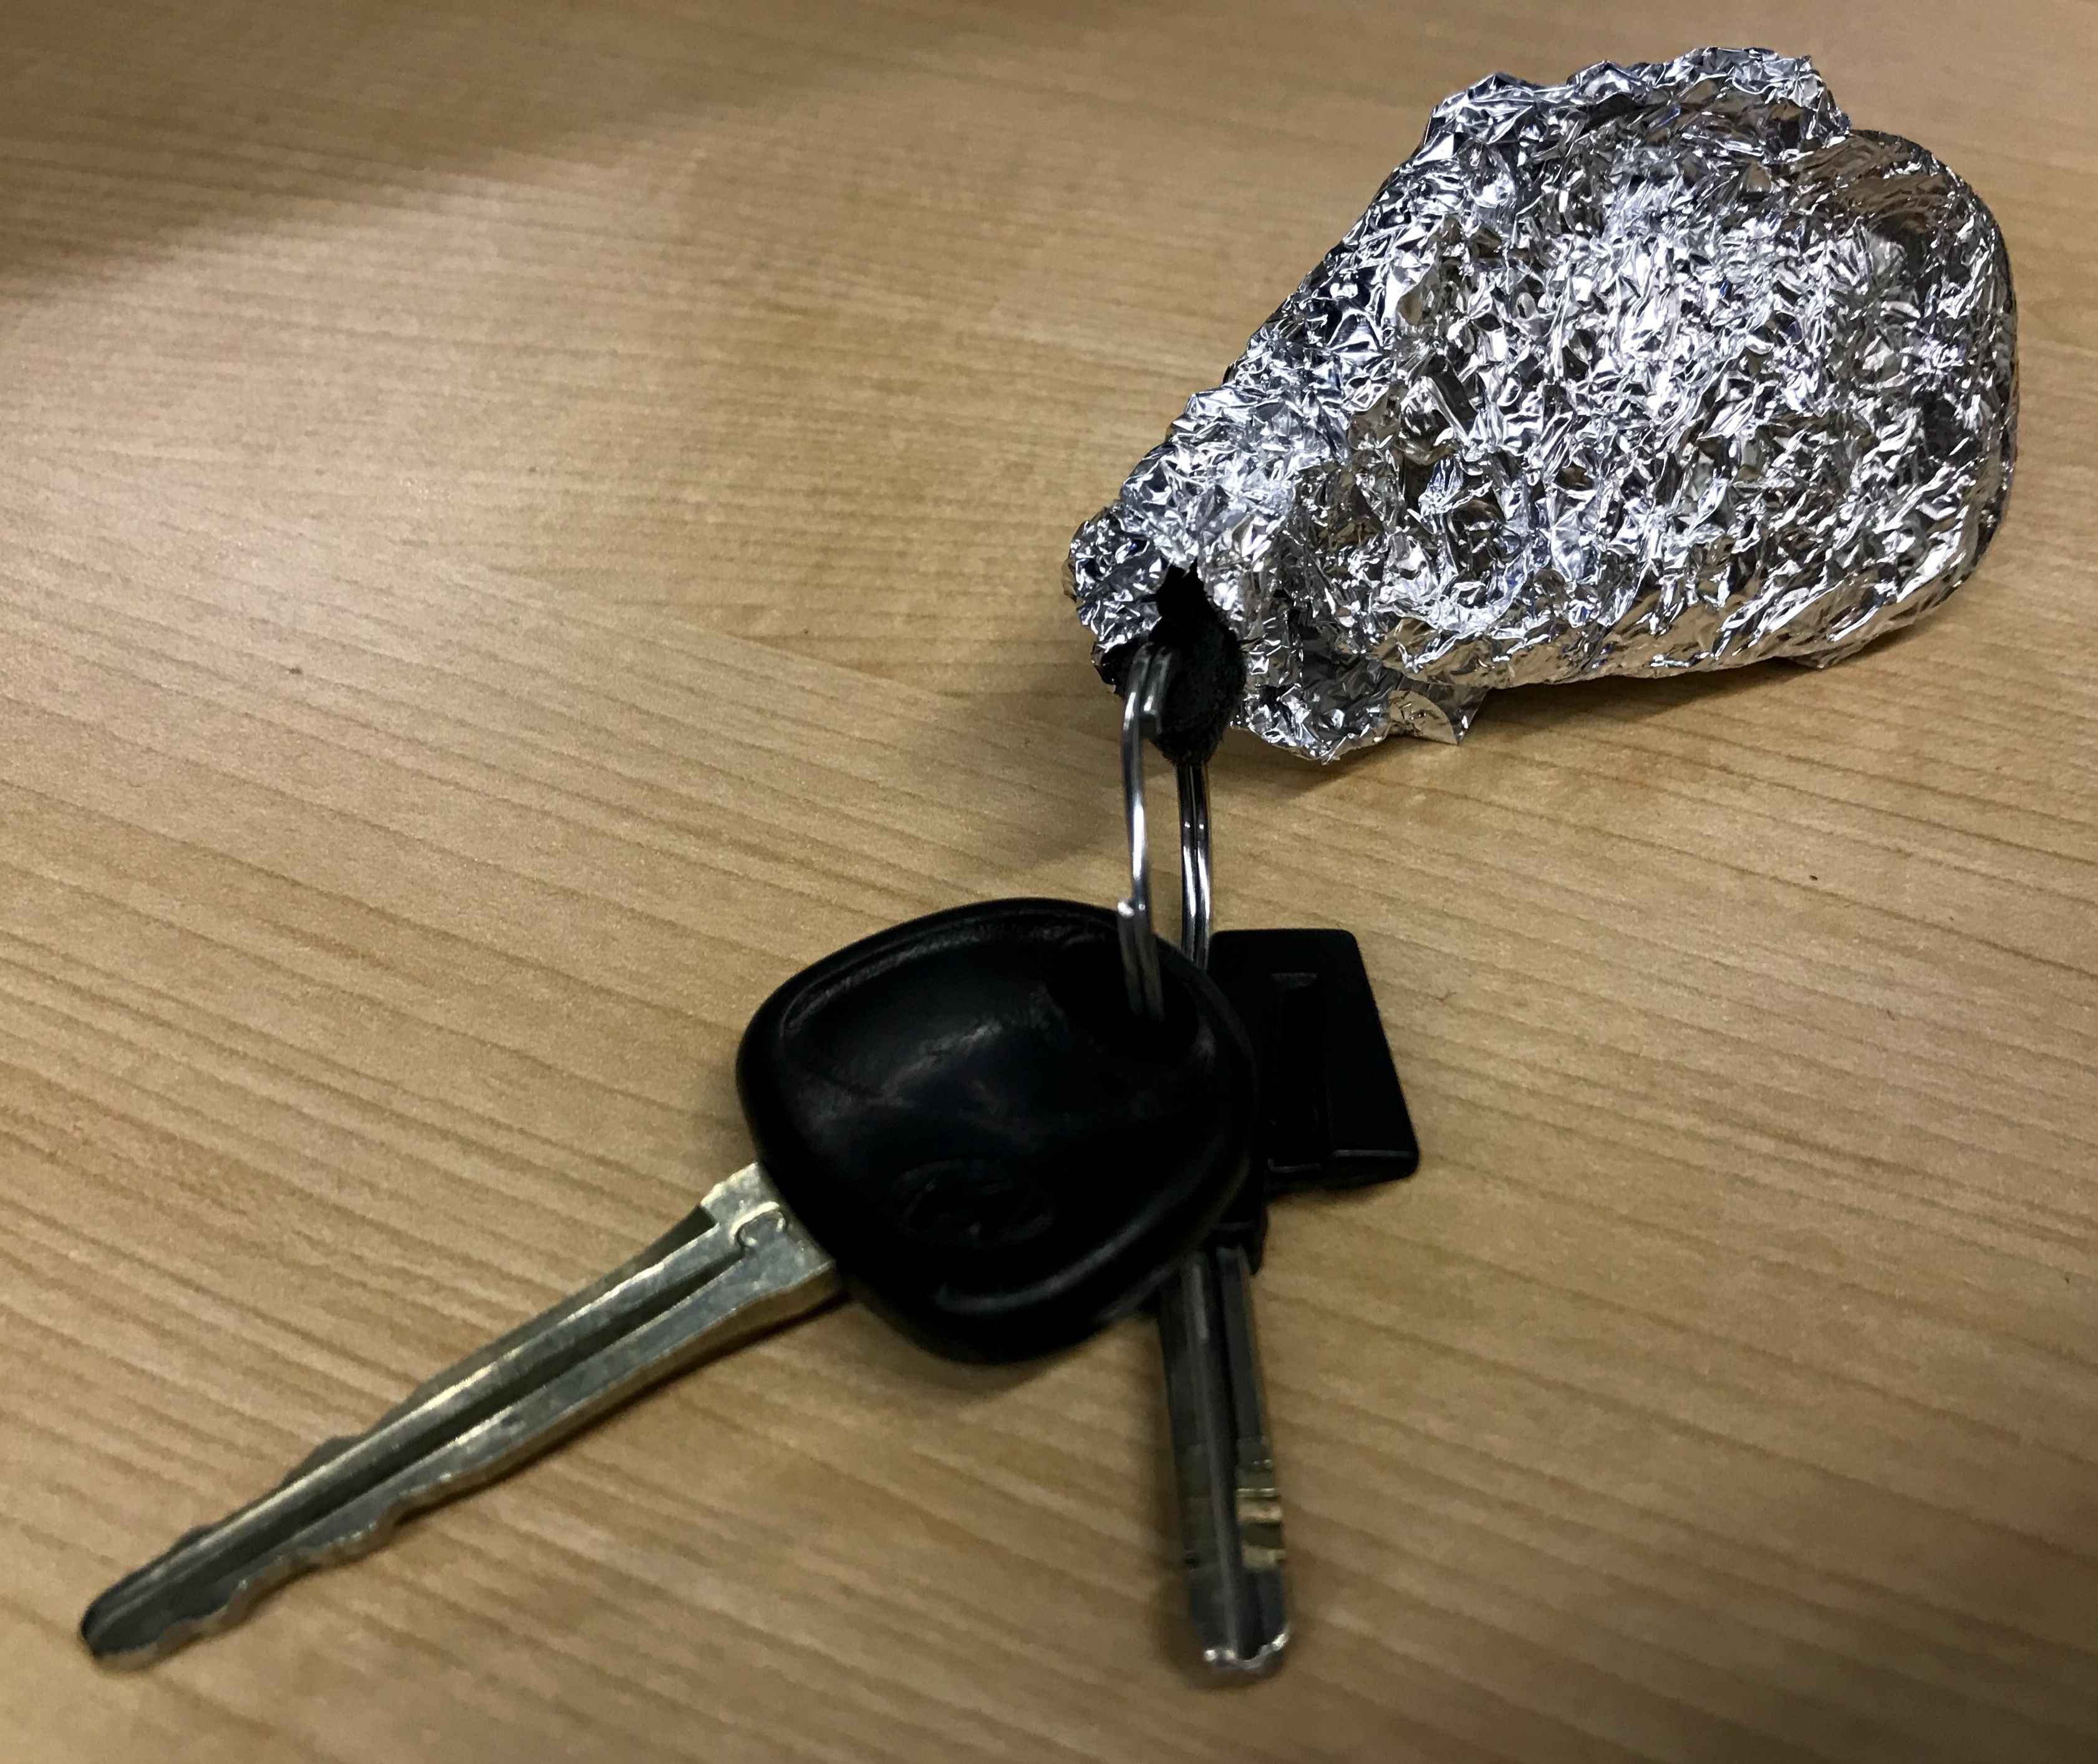 How wrapping vehicle keys in foil can stymie cyber crooks